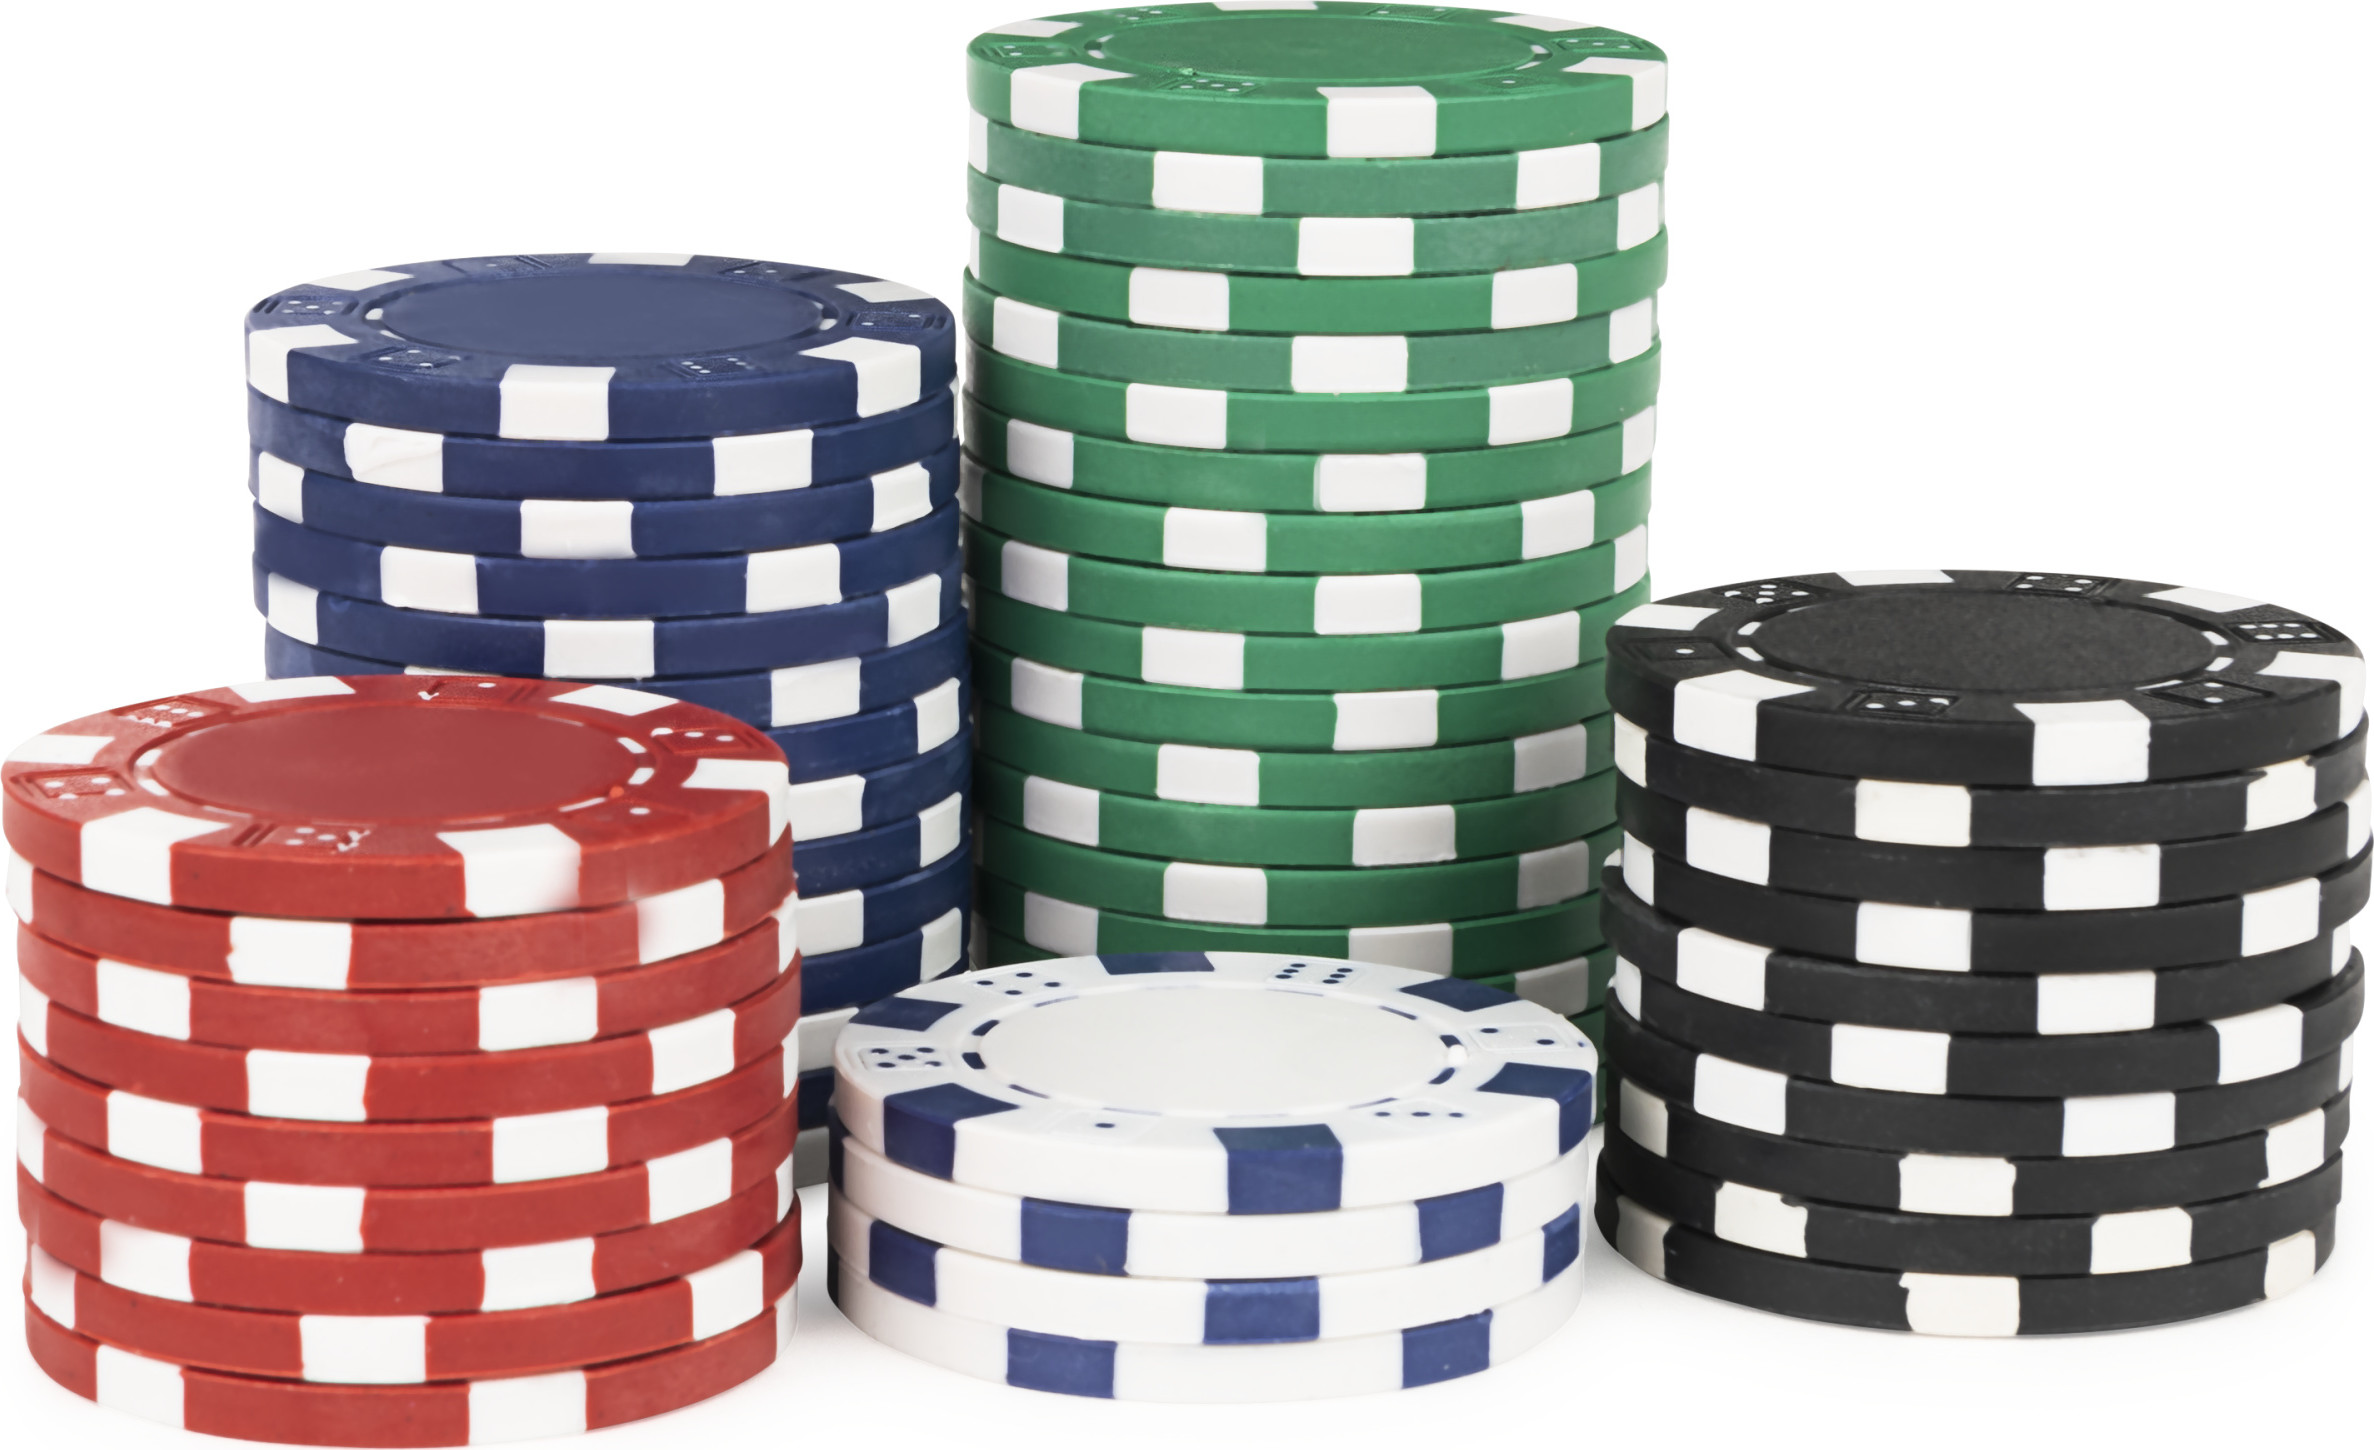 What you Should Know Before Buying Poker Chips